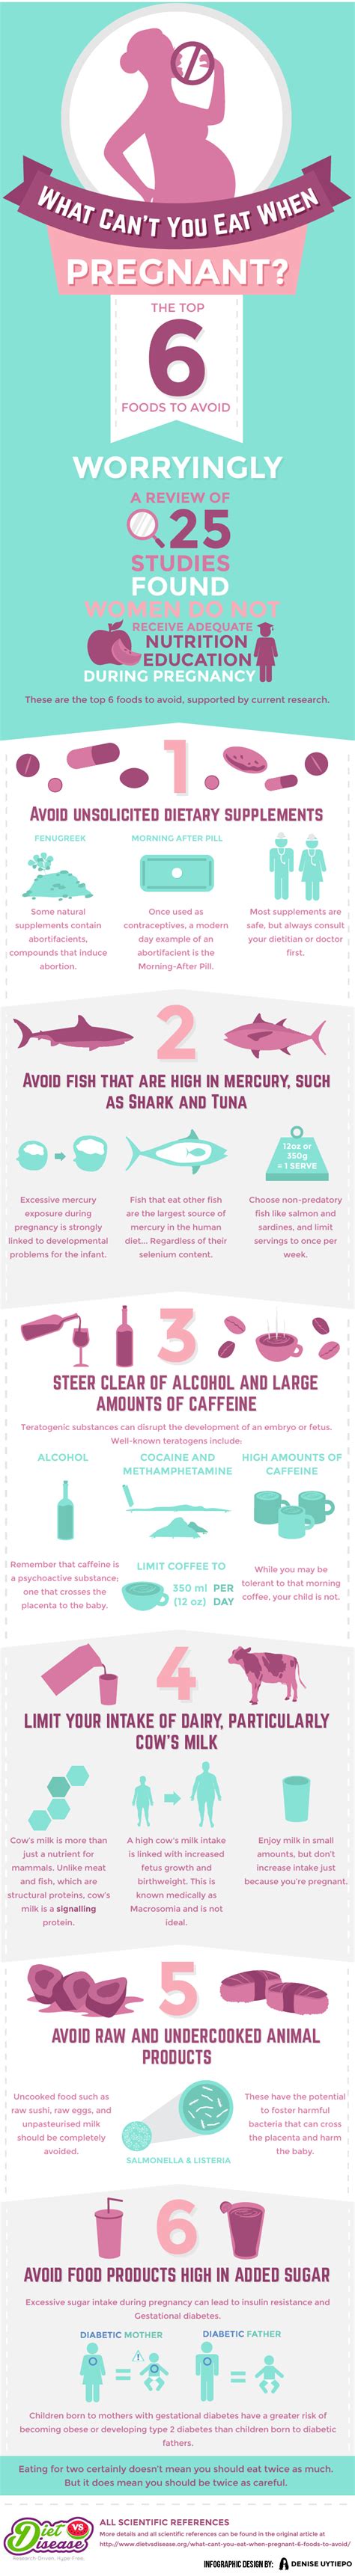 [infographic] Top 6 Foods To Avoid When Pregnant